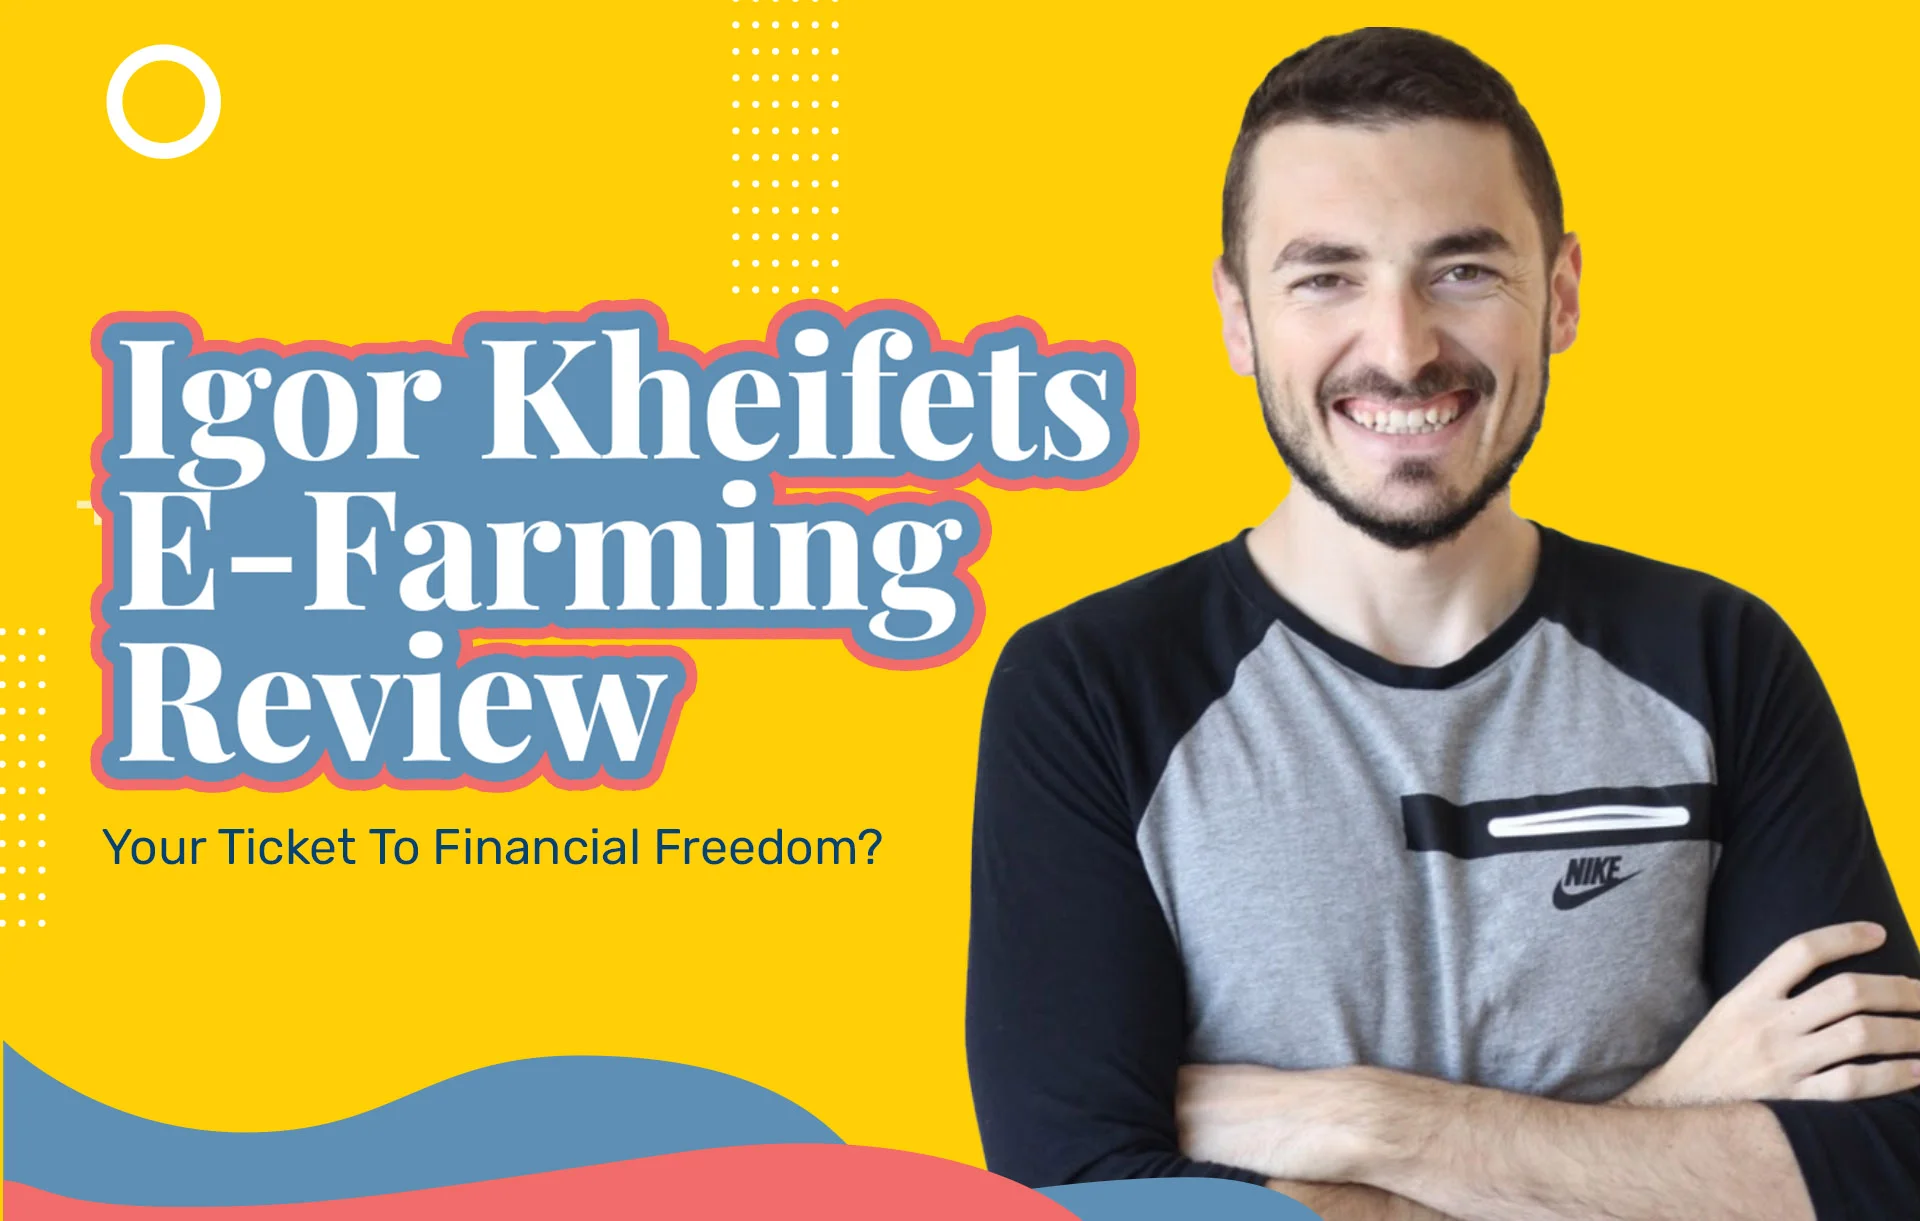 Igor Kheifets E-Farming Review (2023 Update): Your Ticket To Financial Freedom?